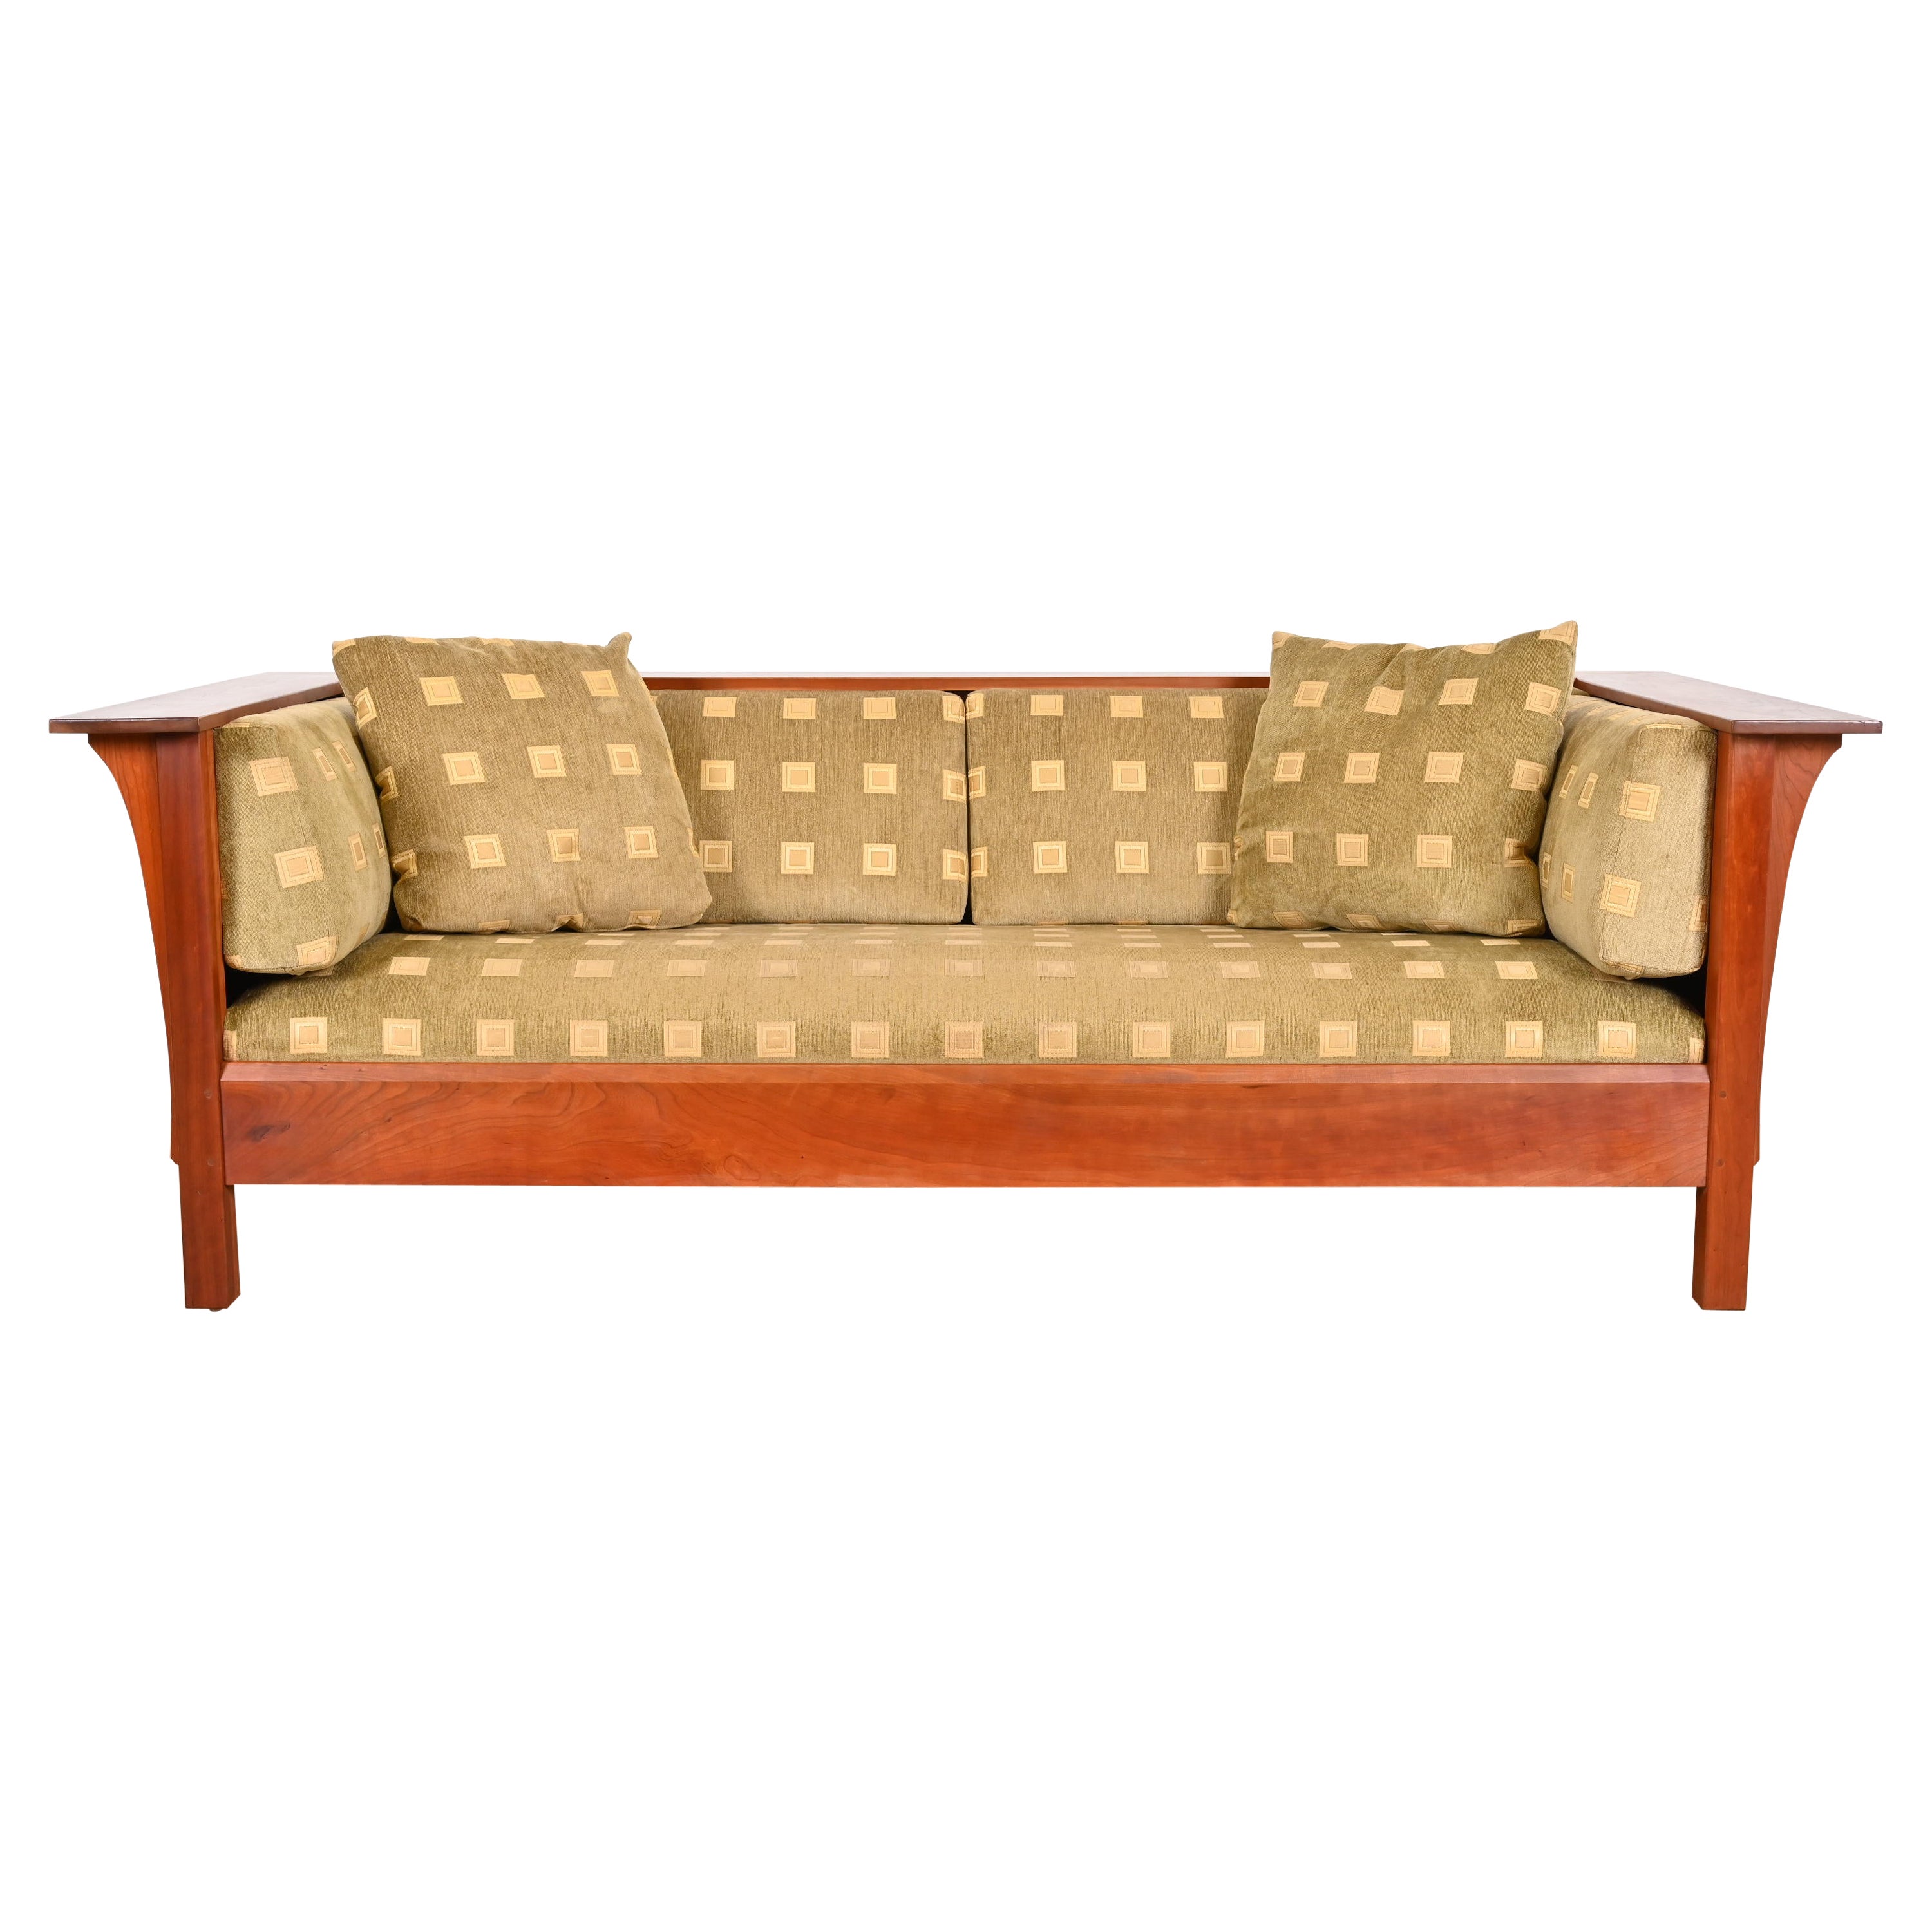 Stickley Mission Arts and Crafts Cherry Wood Settle Sofa For Sale